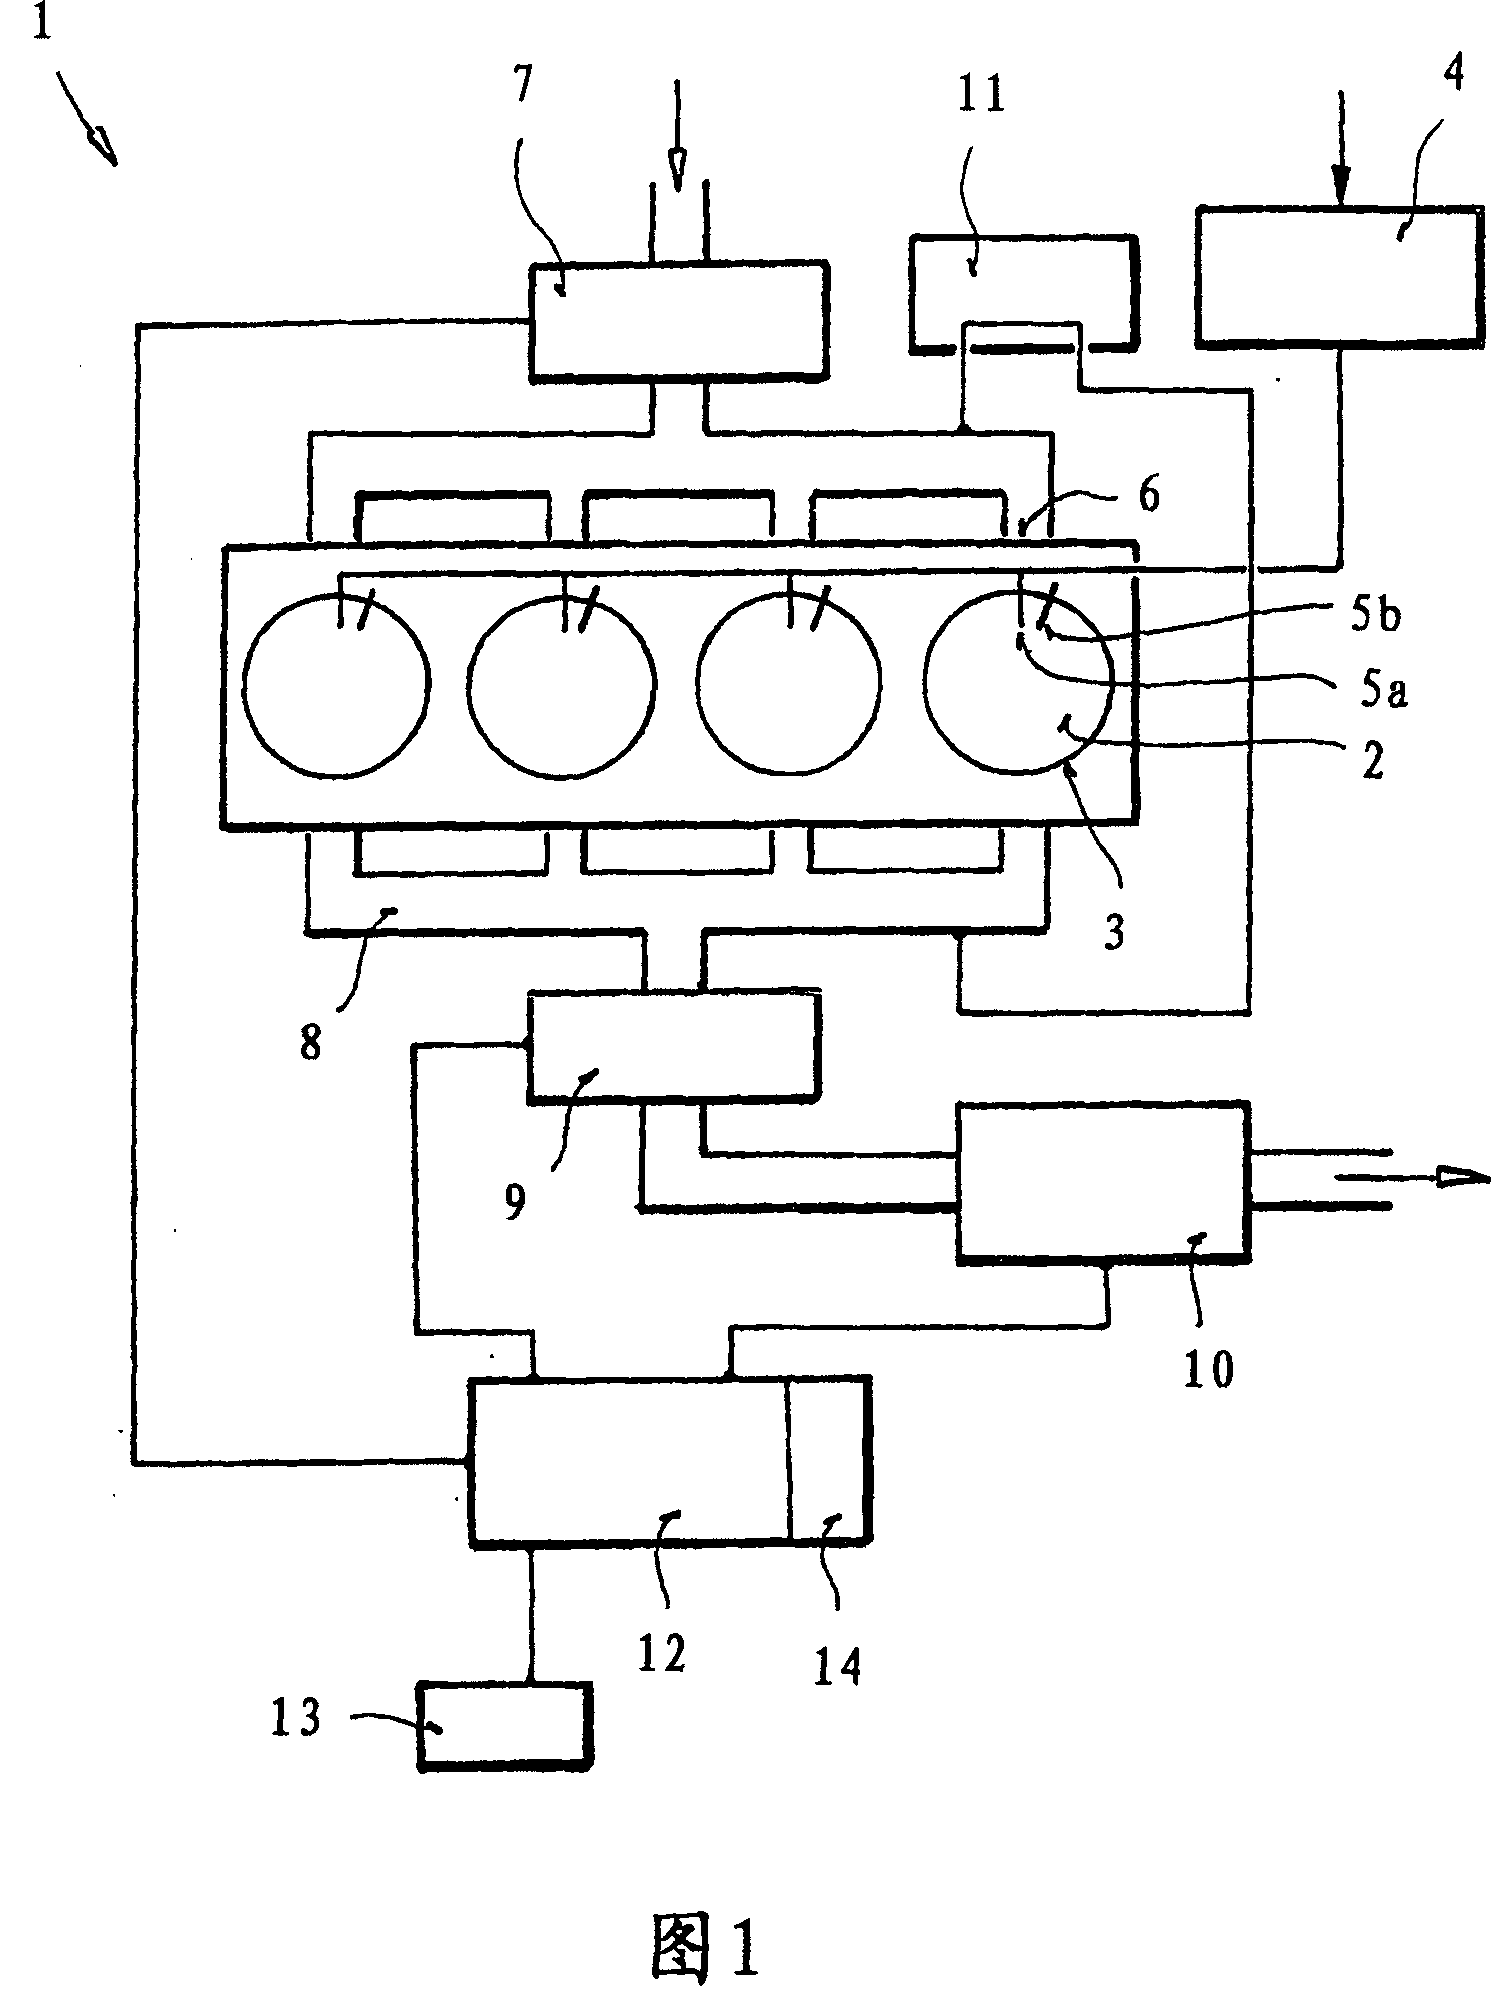 Method for operating an internal combustion engine, and internal combustion engine for carrying out said method